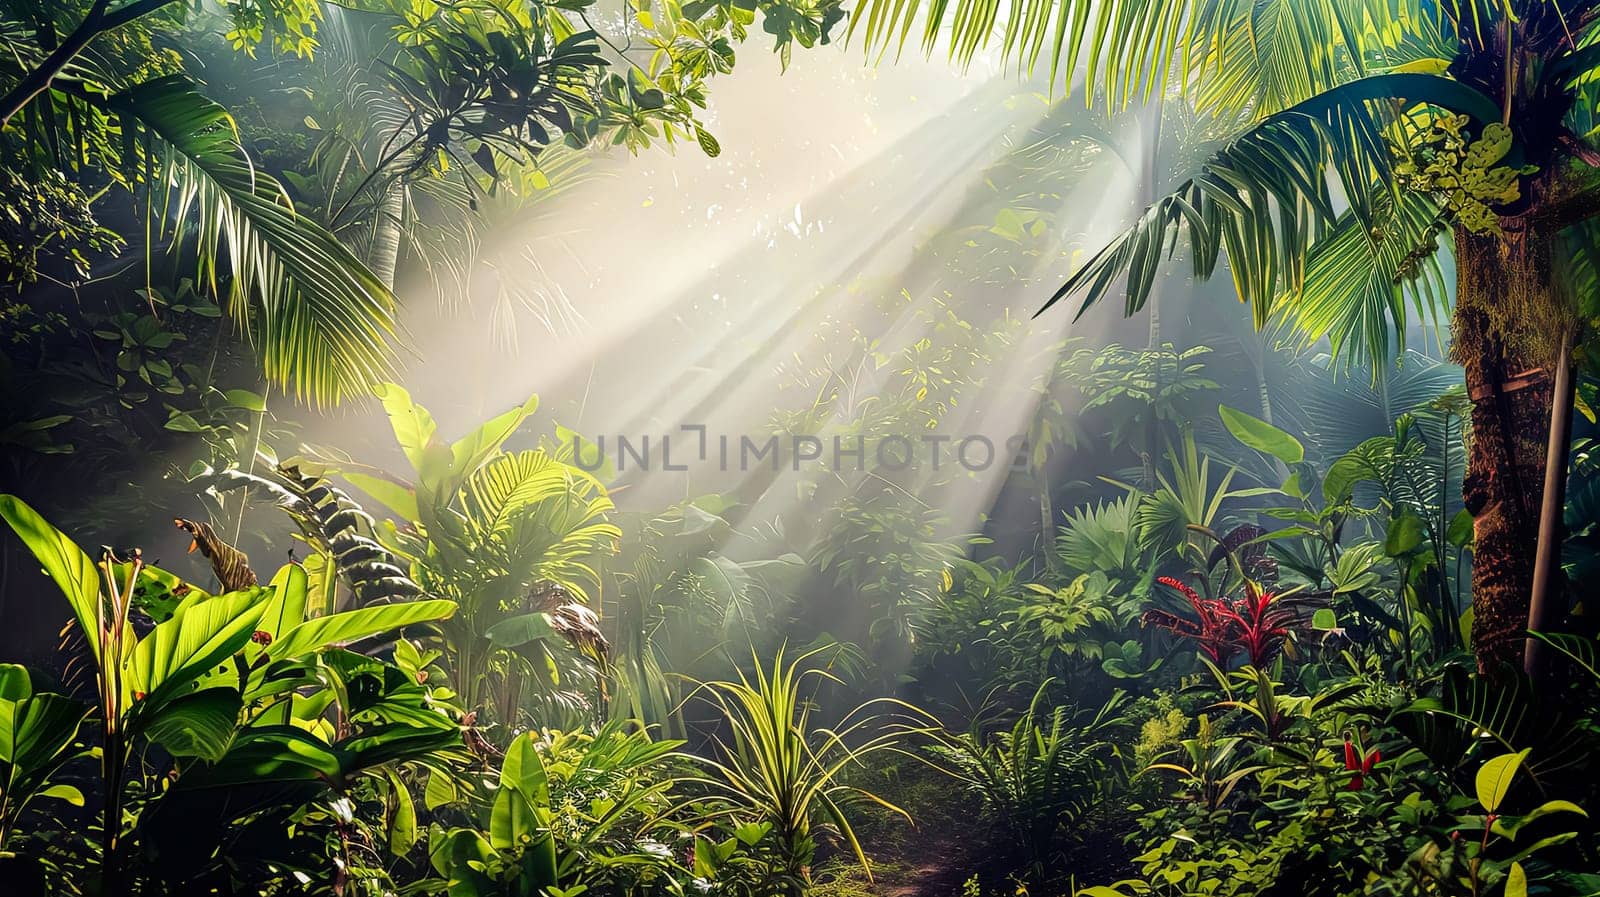 A lush, tropical jungle with a bright sun shining through the trees. The sunlight creates a warm, inviting atmosphere and highlights the vibrant green foliage. The scene is full of life and energy